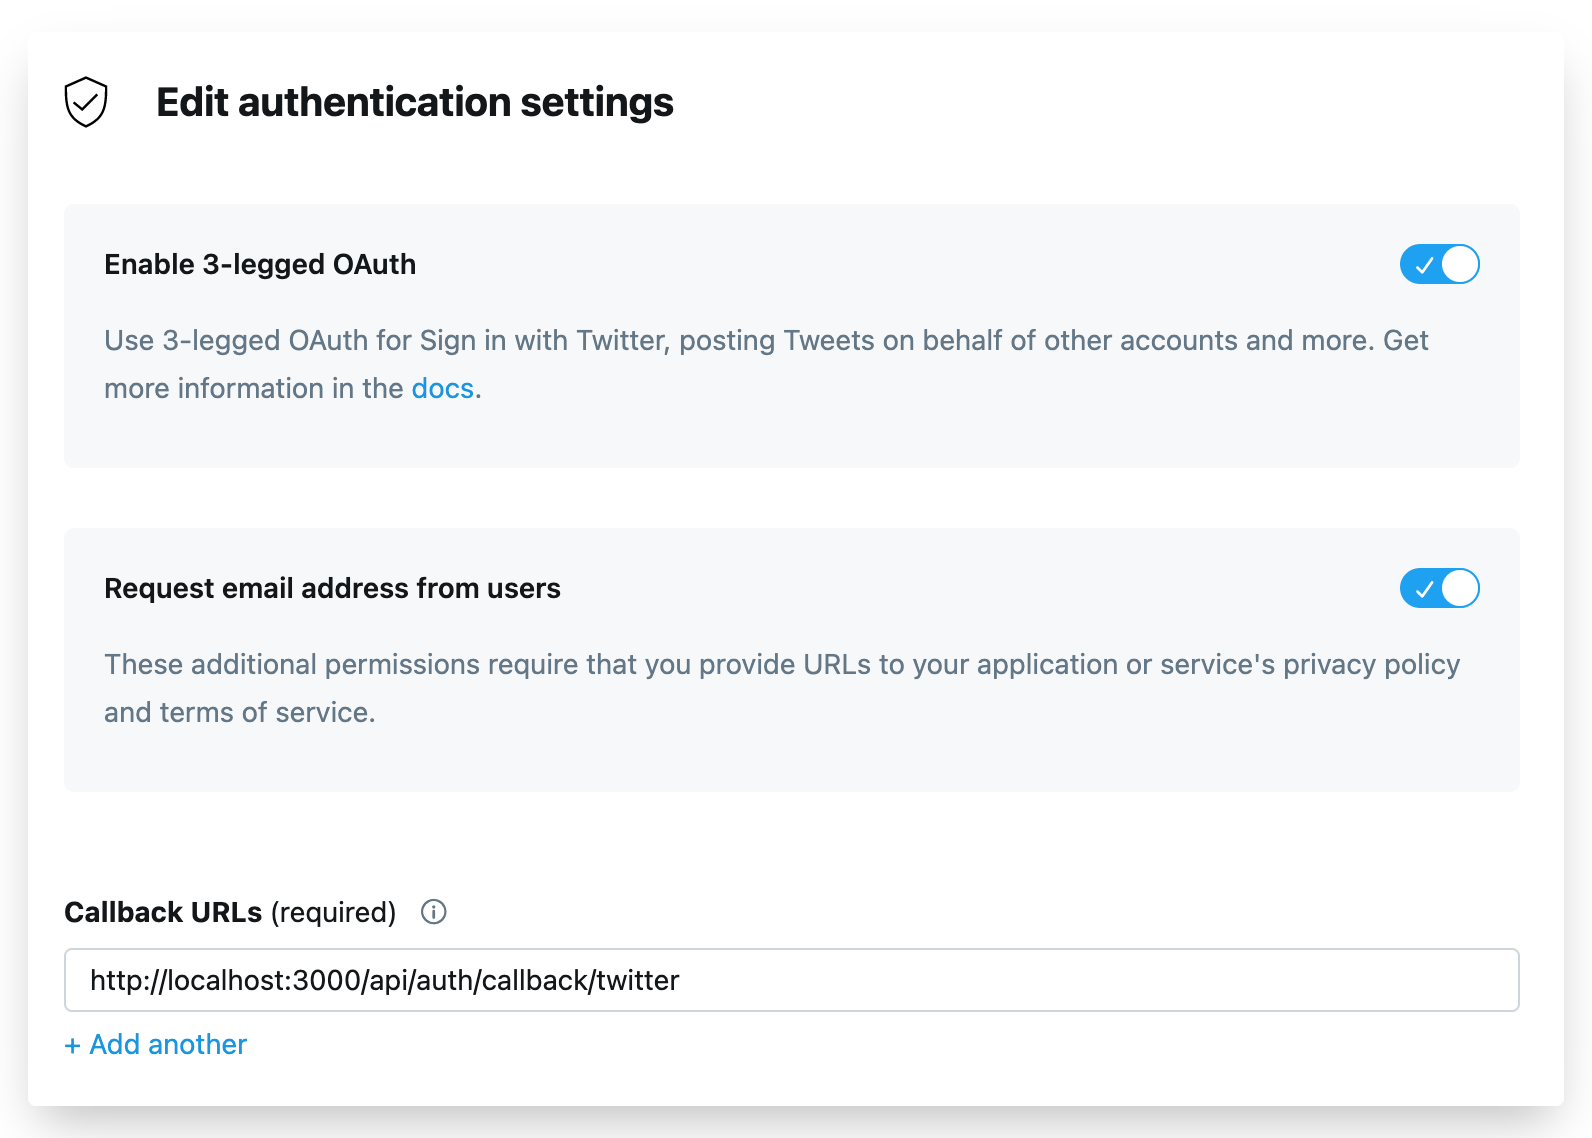 Edit the authentication settings of our Twitter app